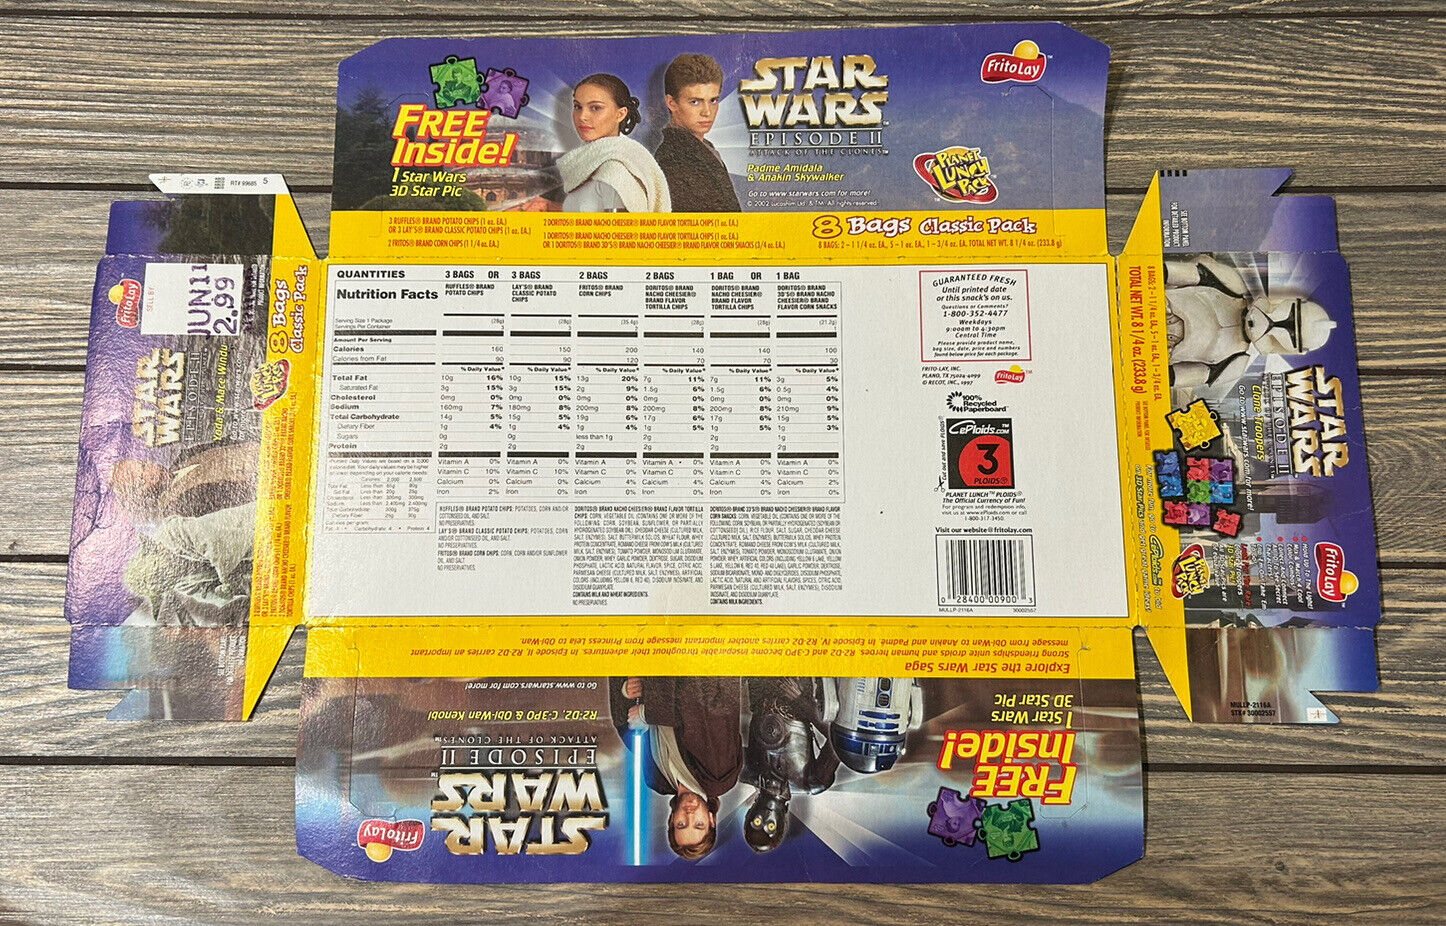 Vintage 1999 Star Wars Episode 2 Frito Lay Promotional Advertisement Box